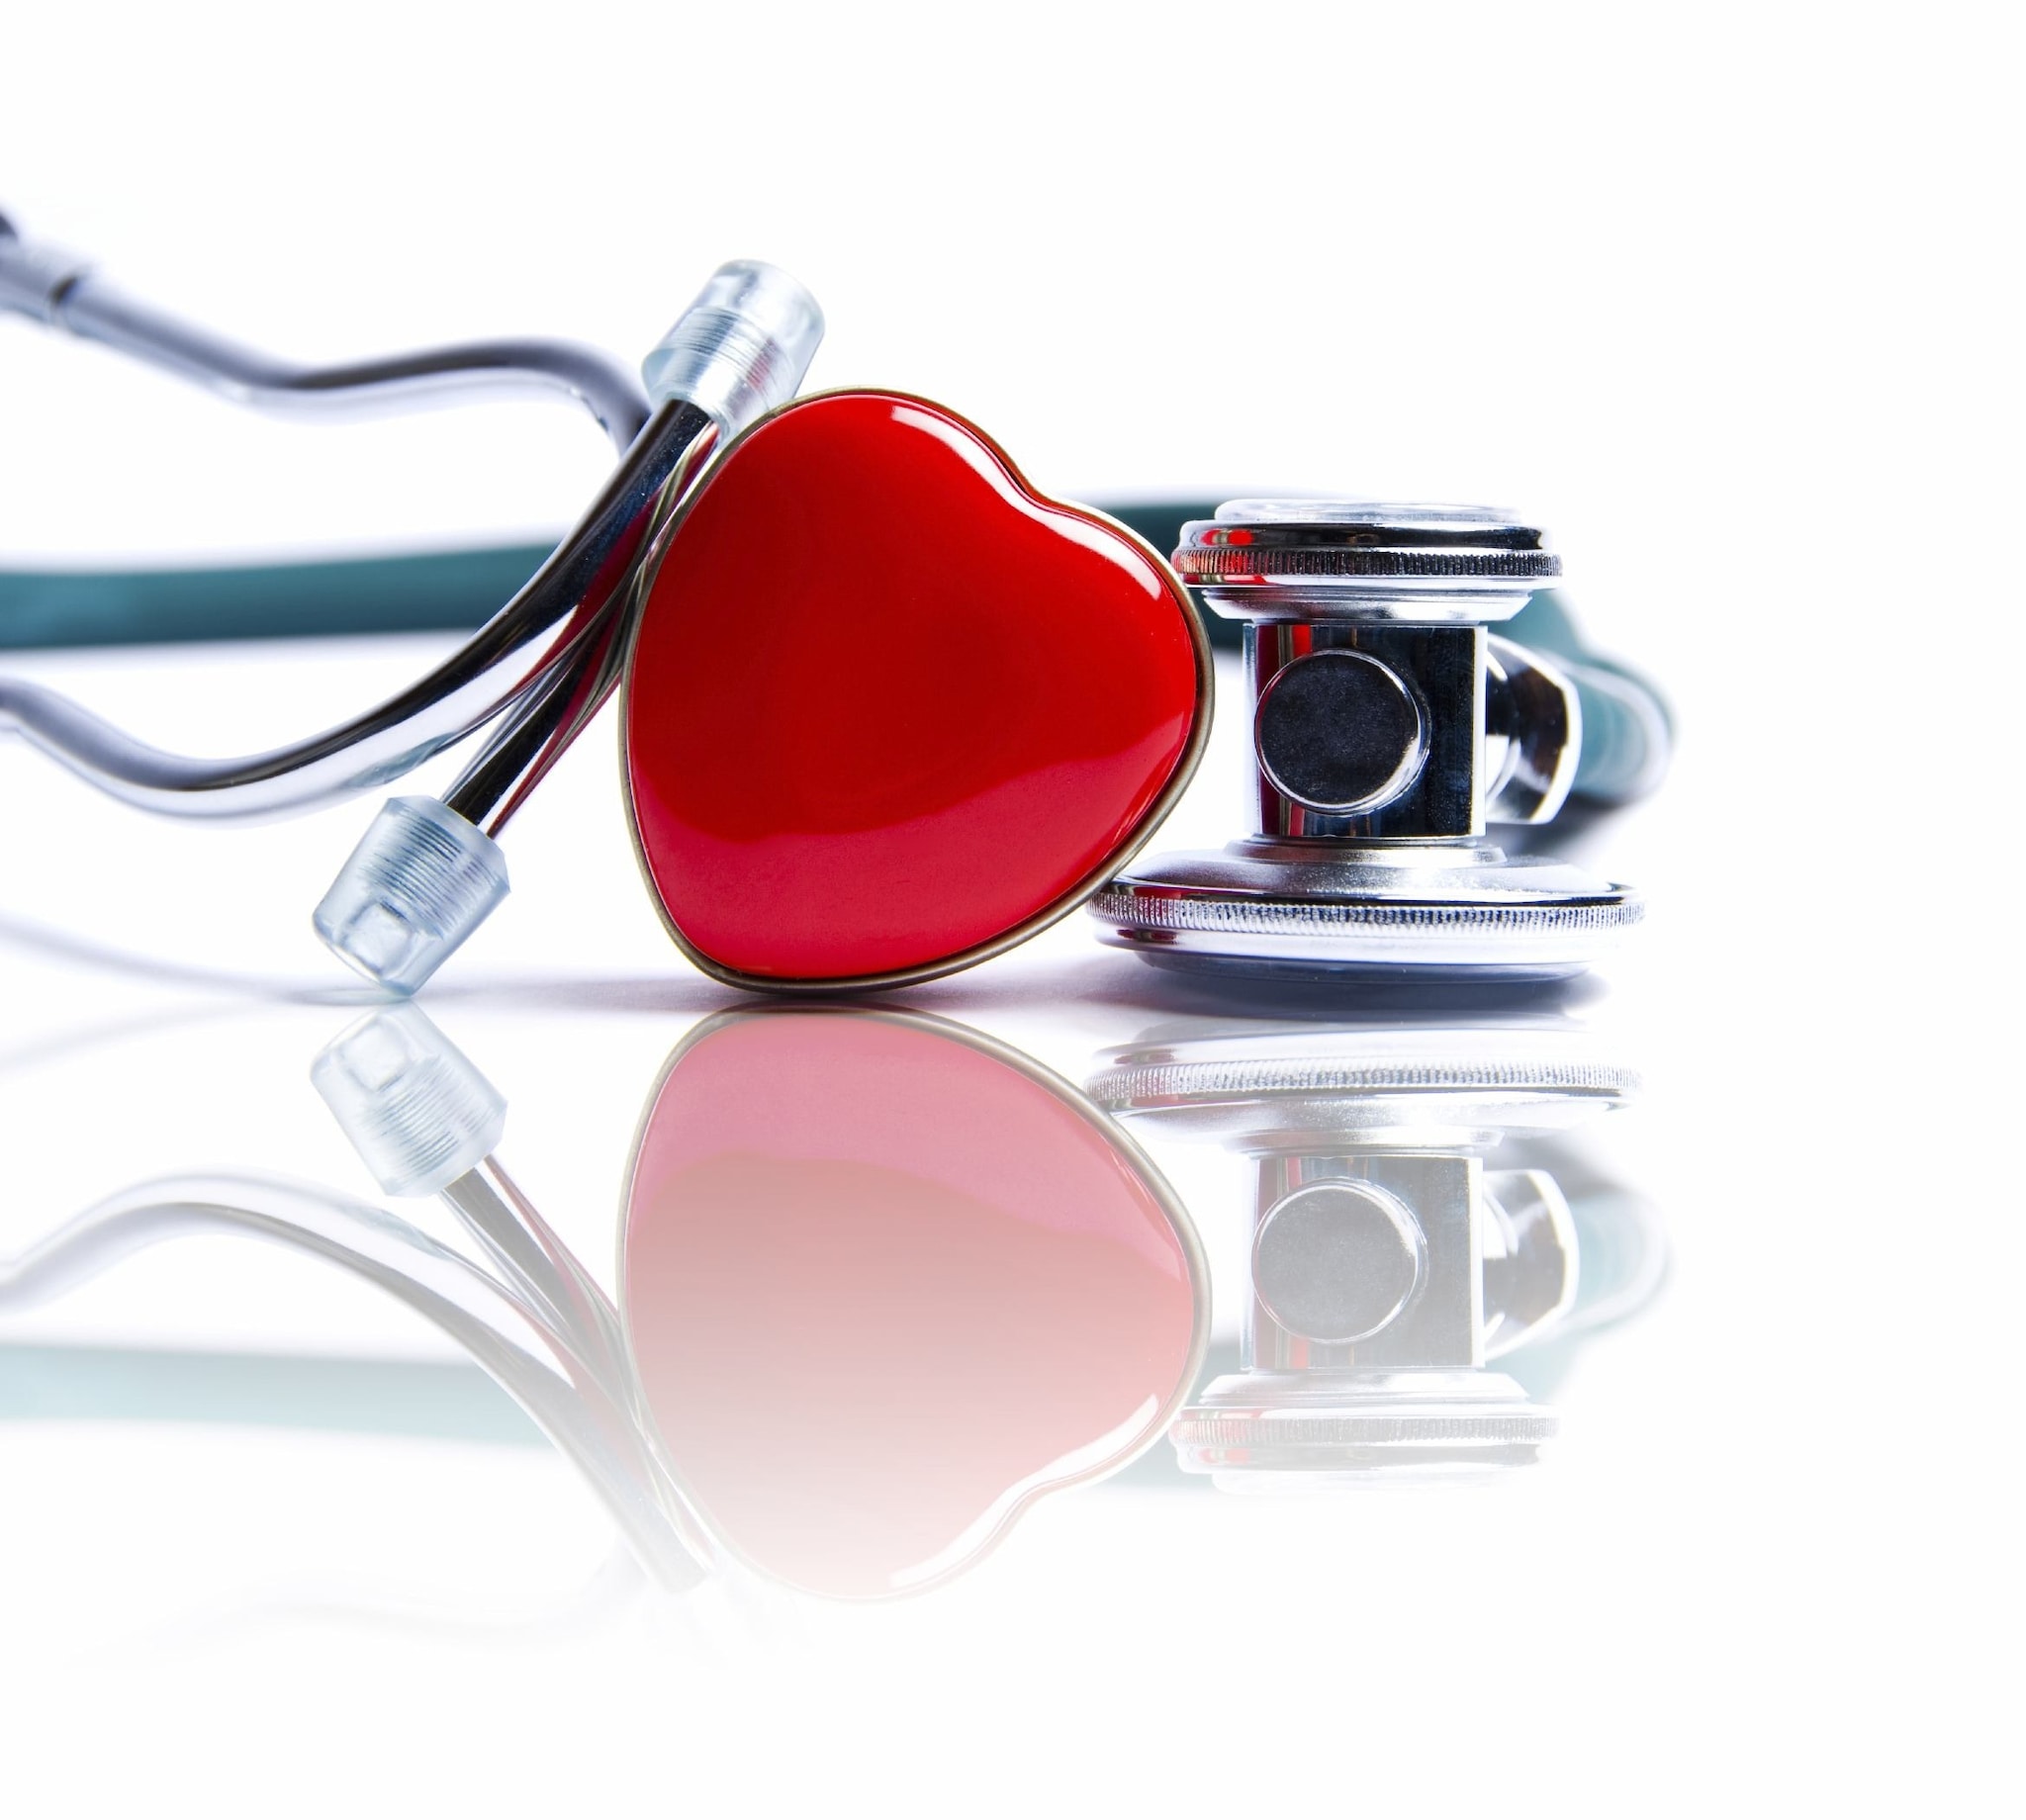 A heart pin leaning on a stethoscope